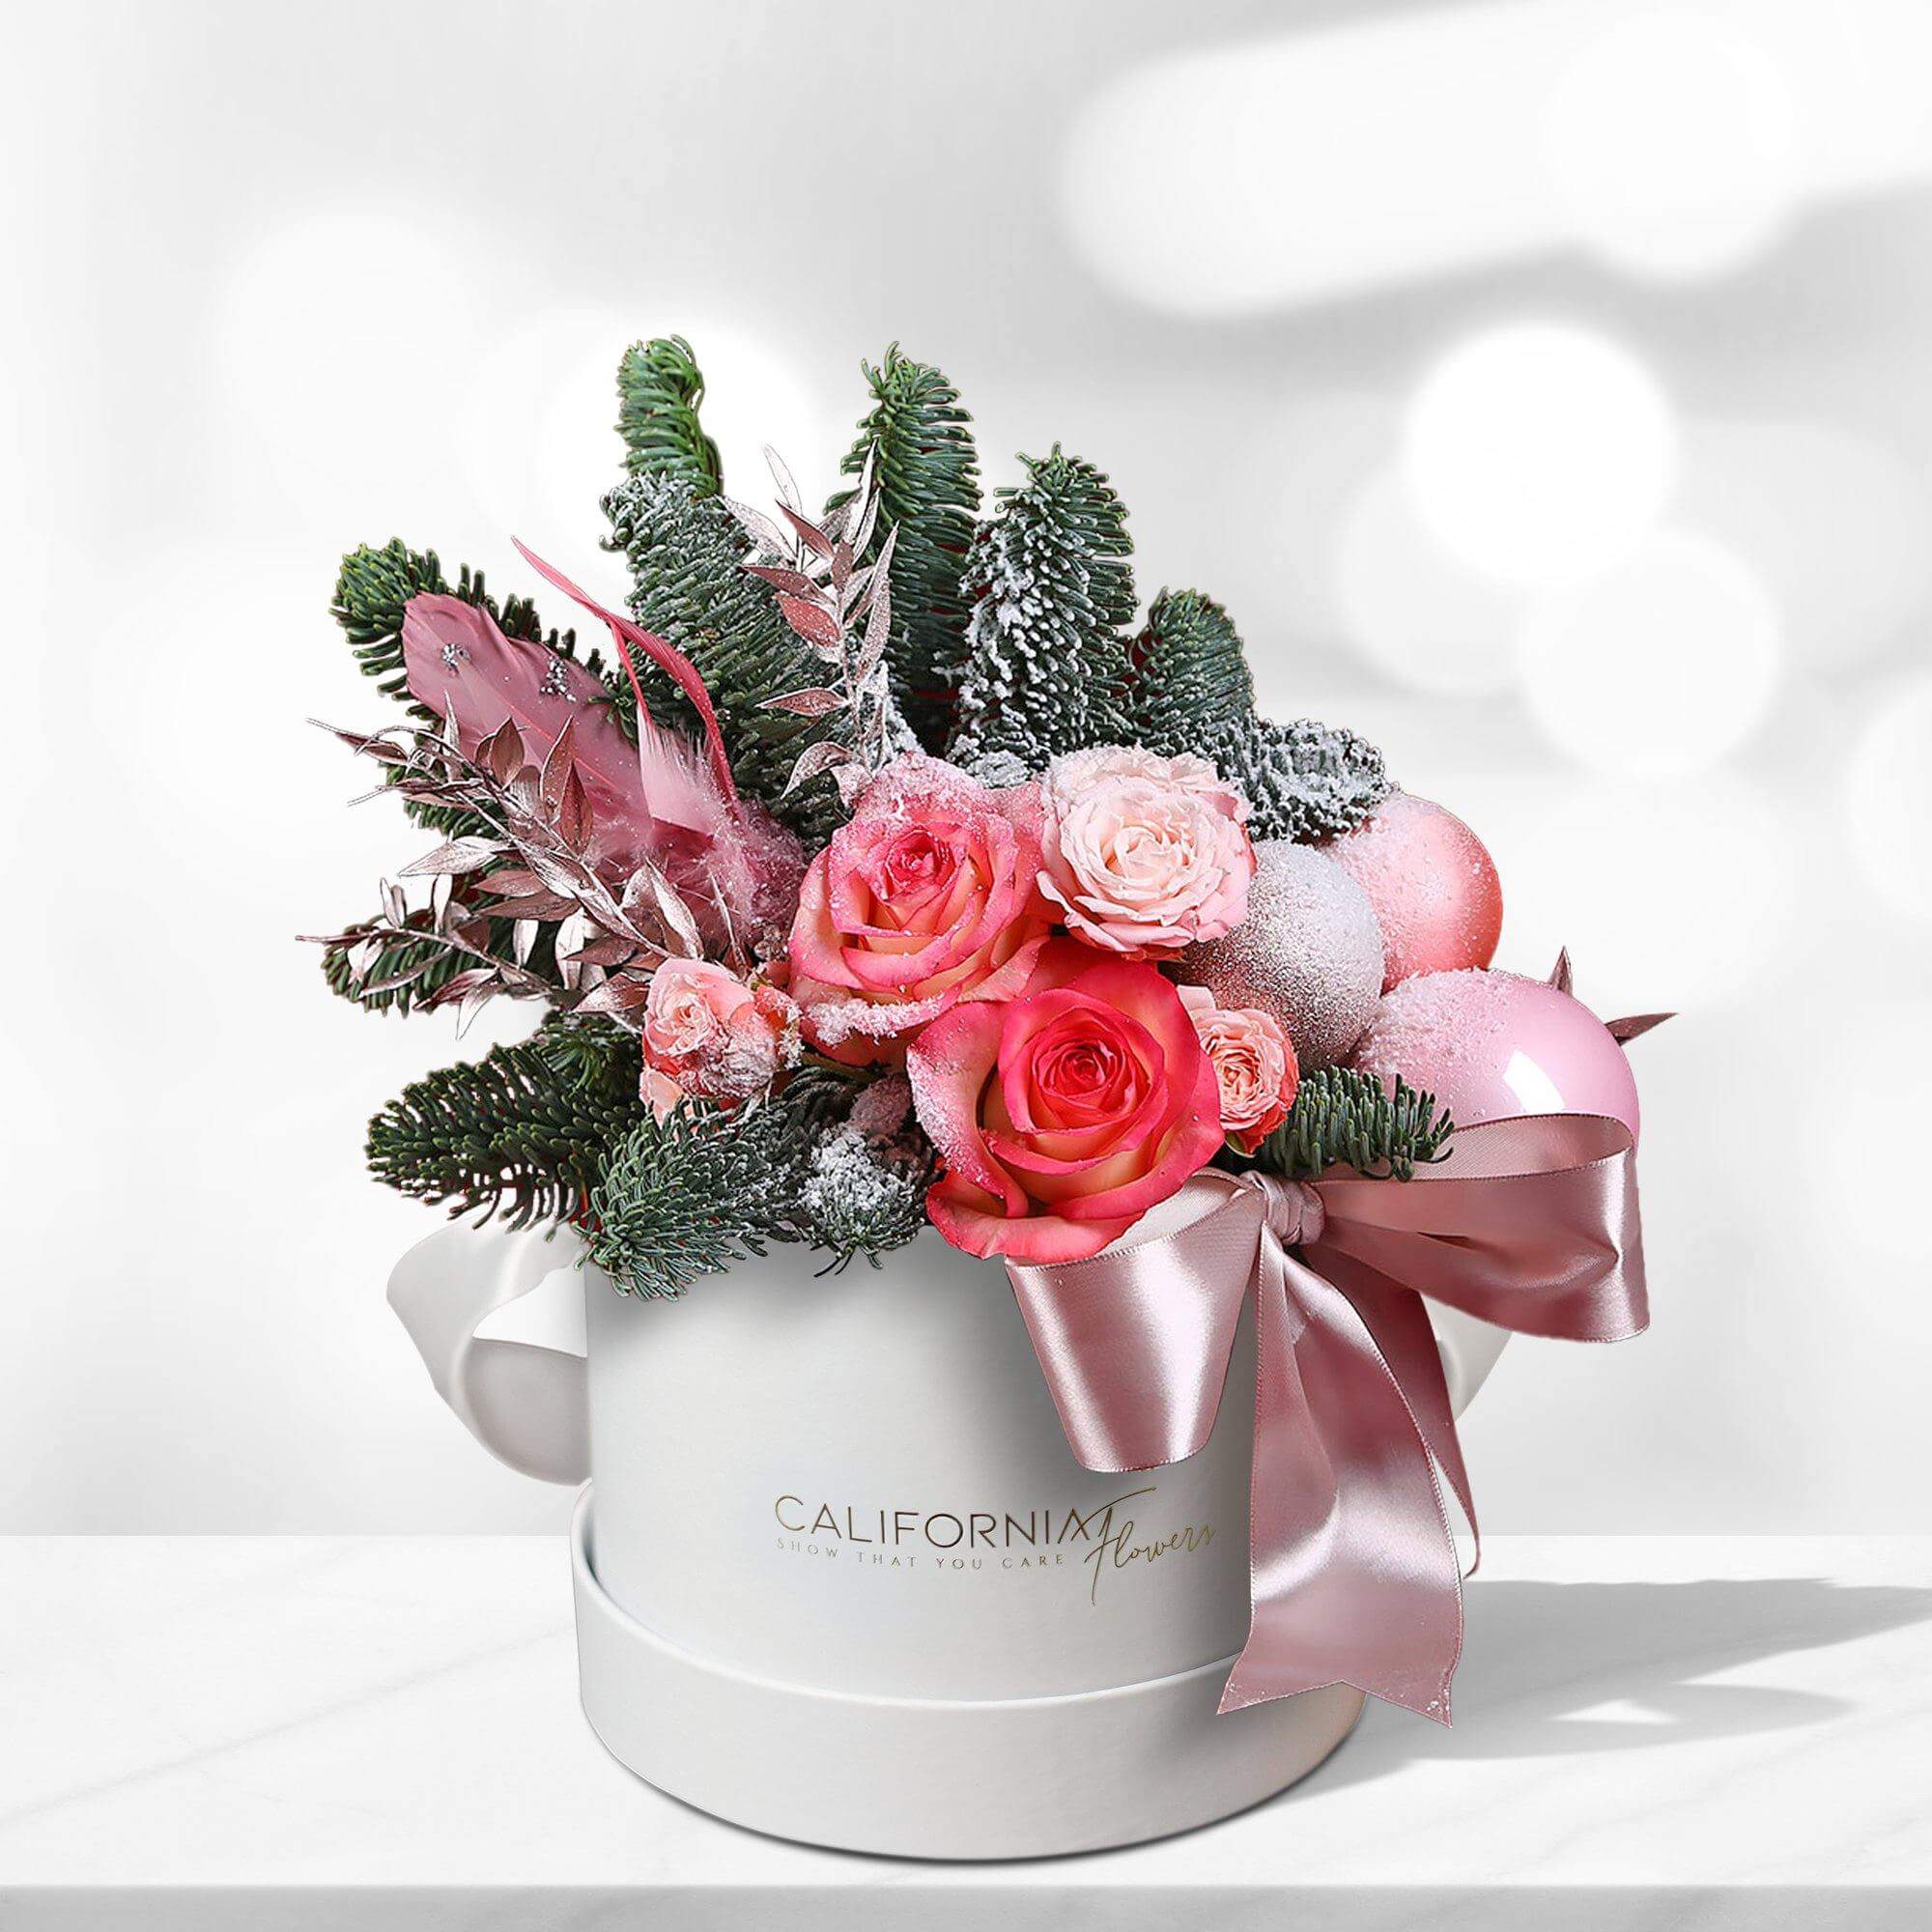 White box with pink roses and fir tree